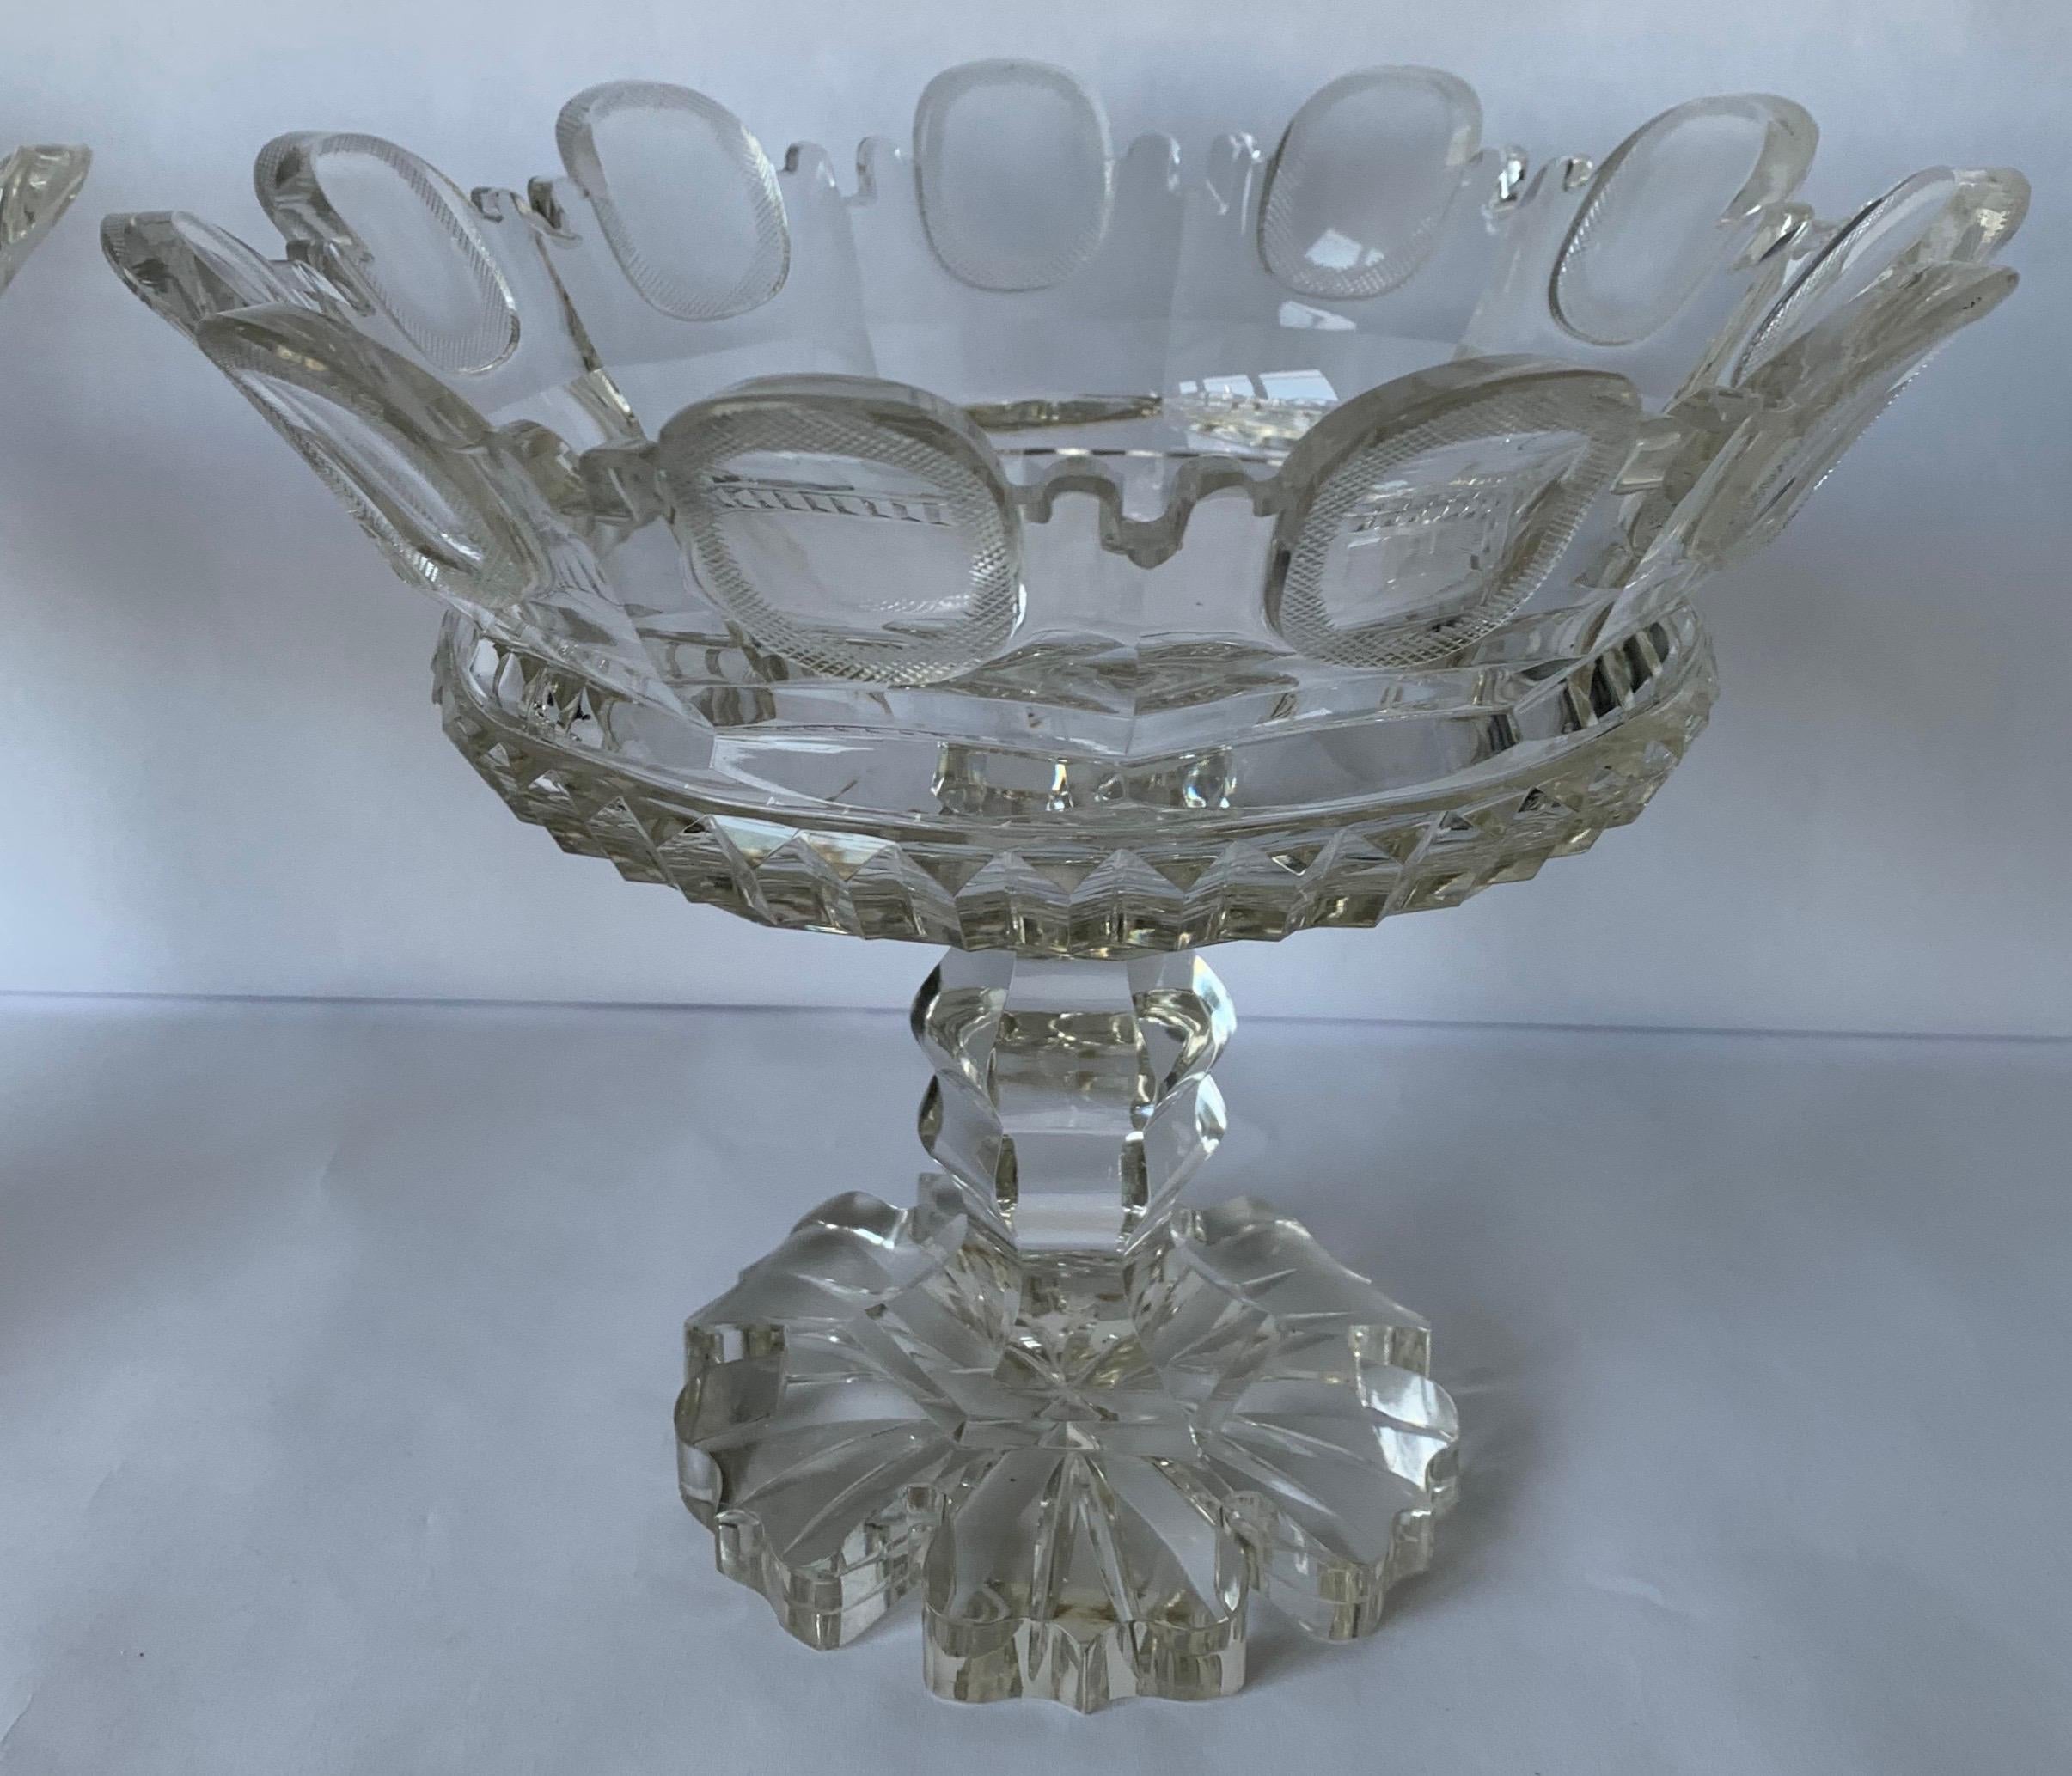 Pair of Anglo-Irish cut crystal mantel (fireplace) vases circa 1820. Cremelated Diamond and sawtooth cut tops with strawberry diamond panels and Gothic arches. Multiple stepped plinths. Strawberry diamond cutting on the bottom. No makers mark or